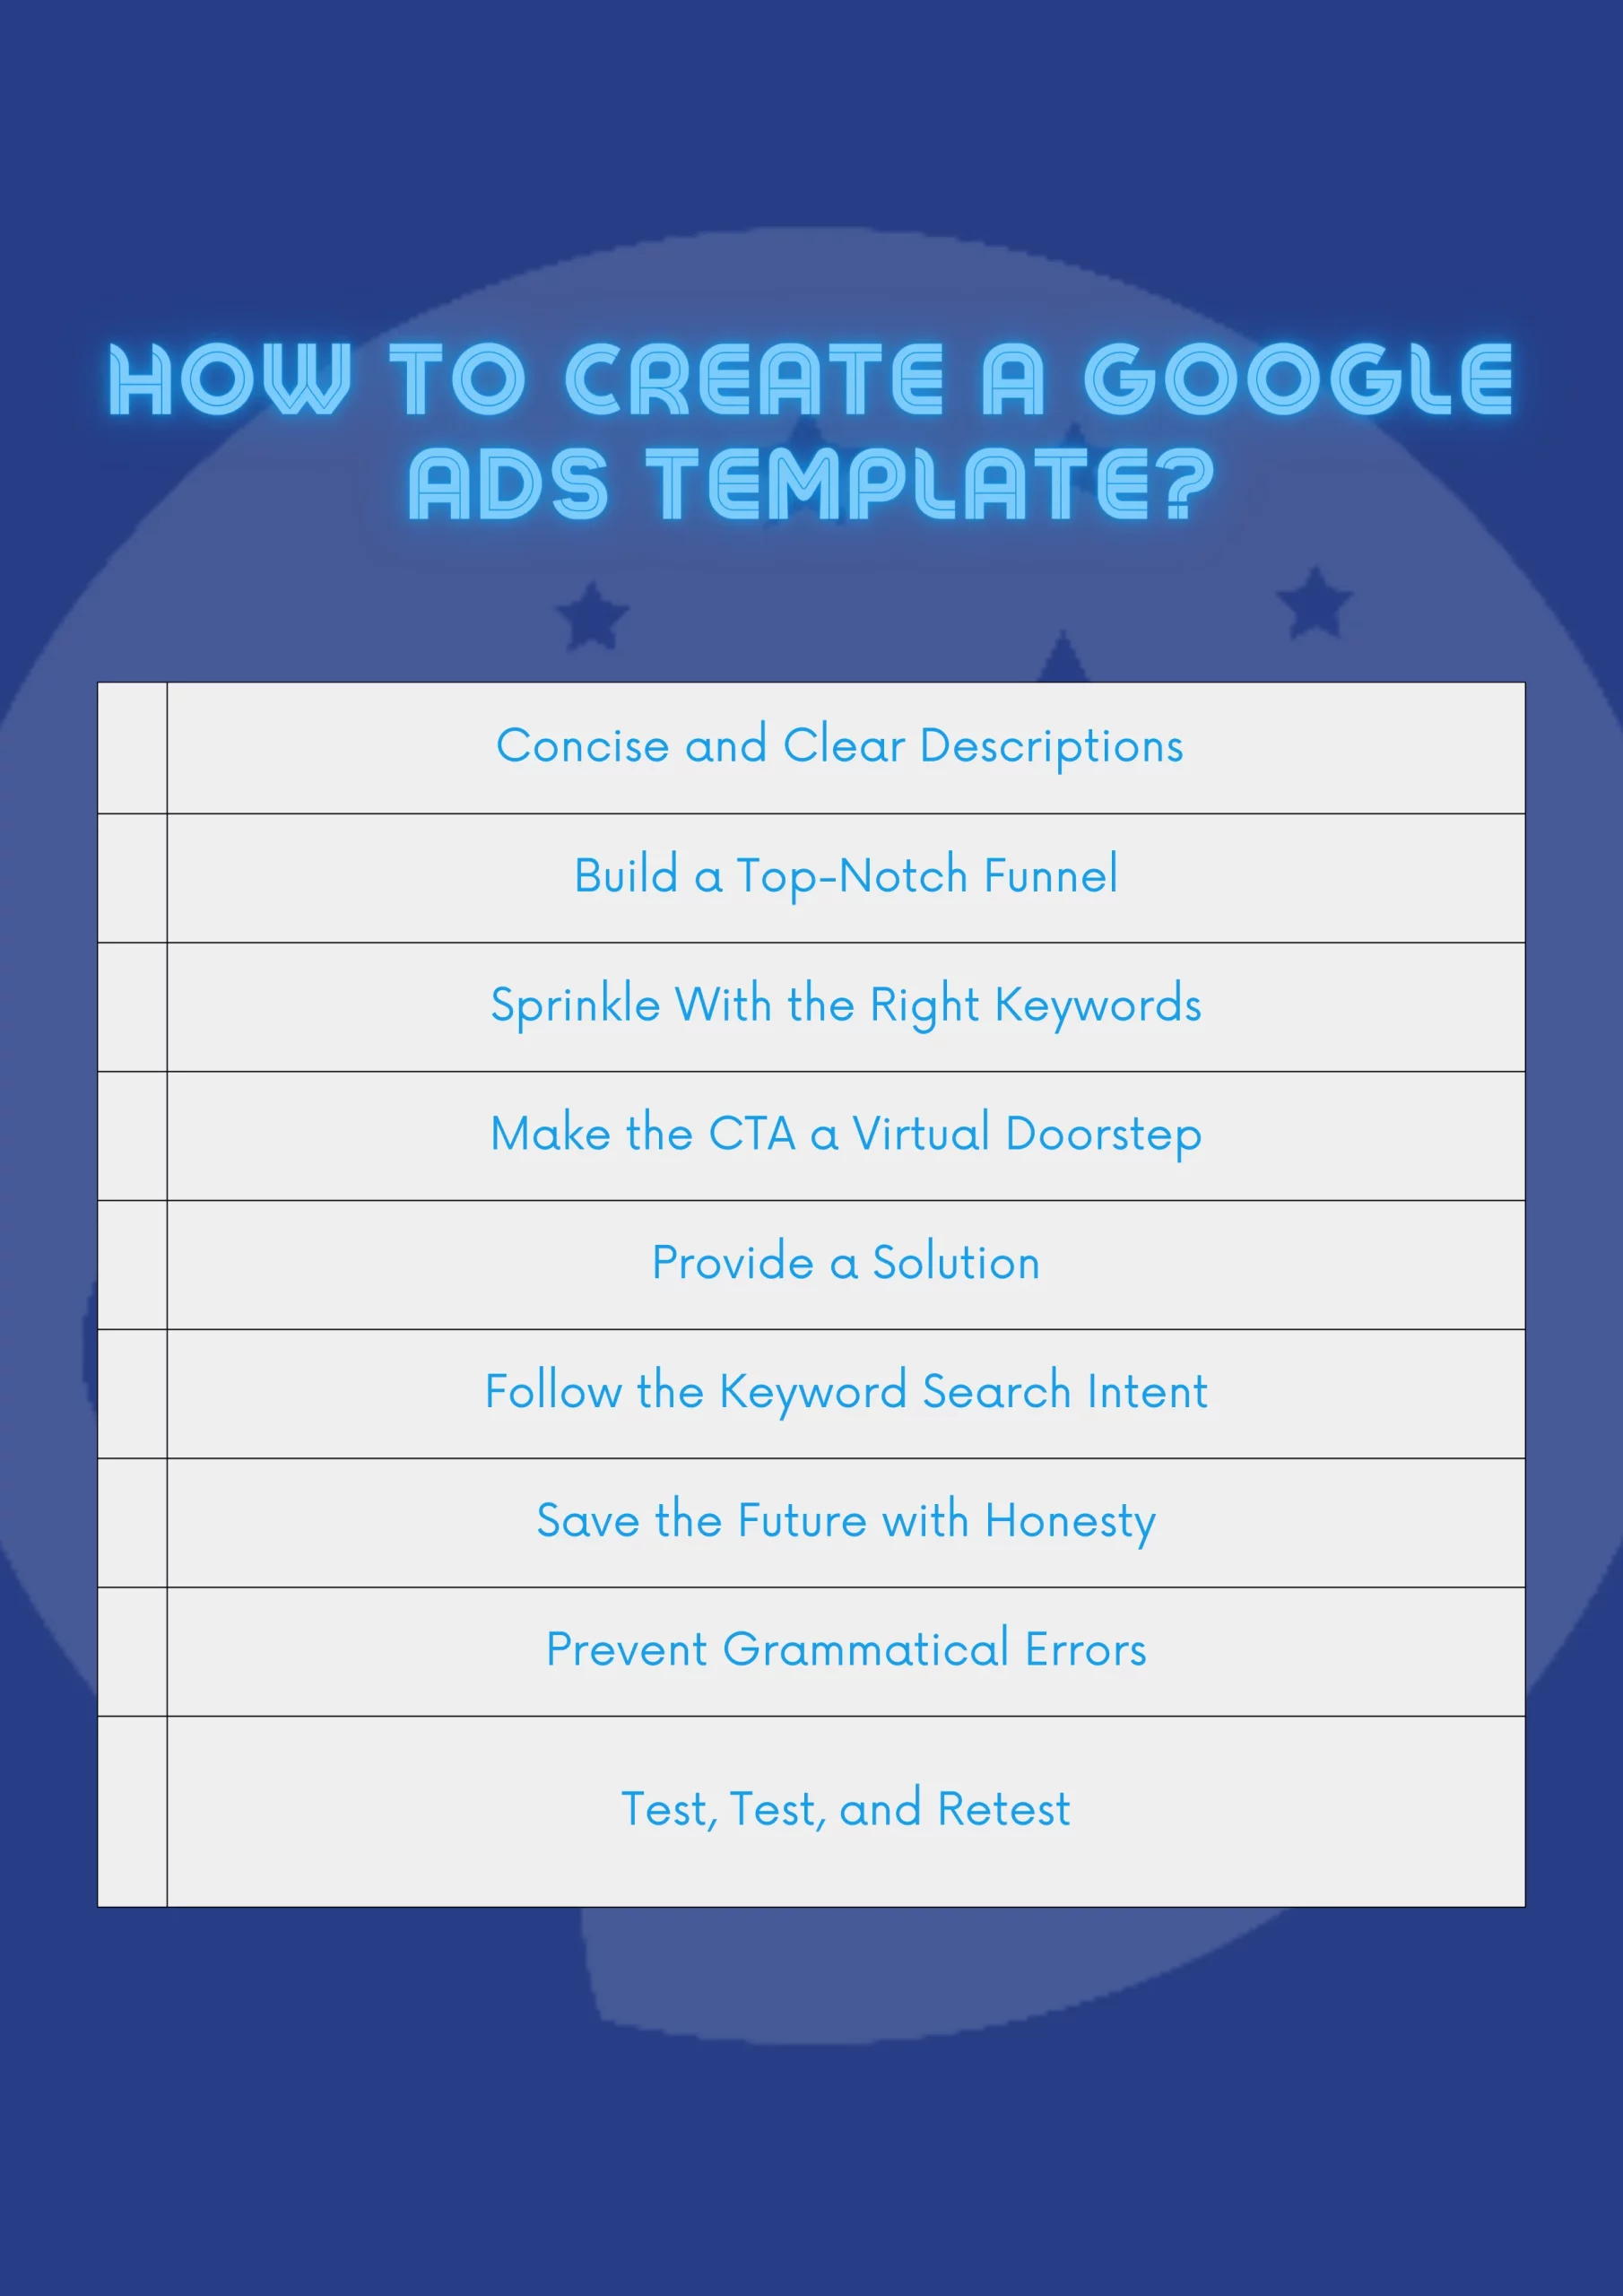 A checklist of how to create a google ads template